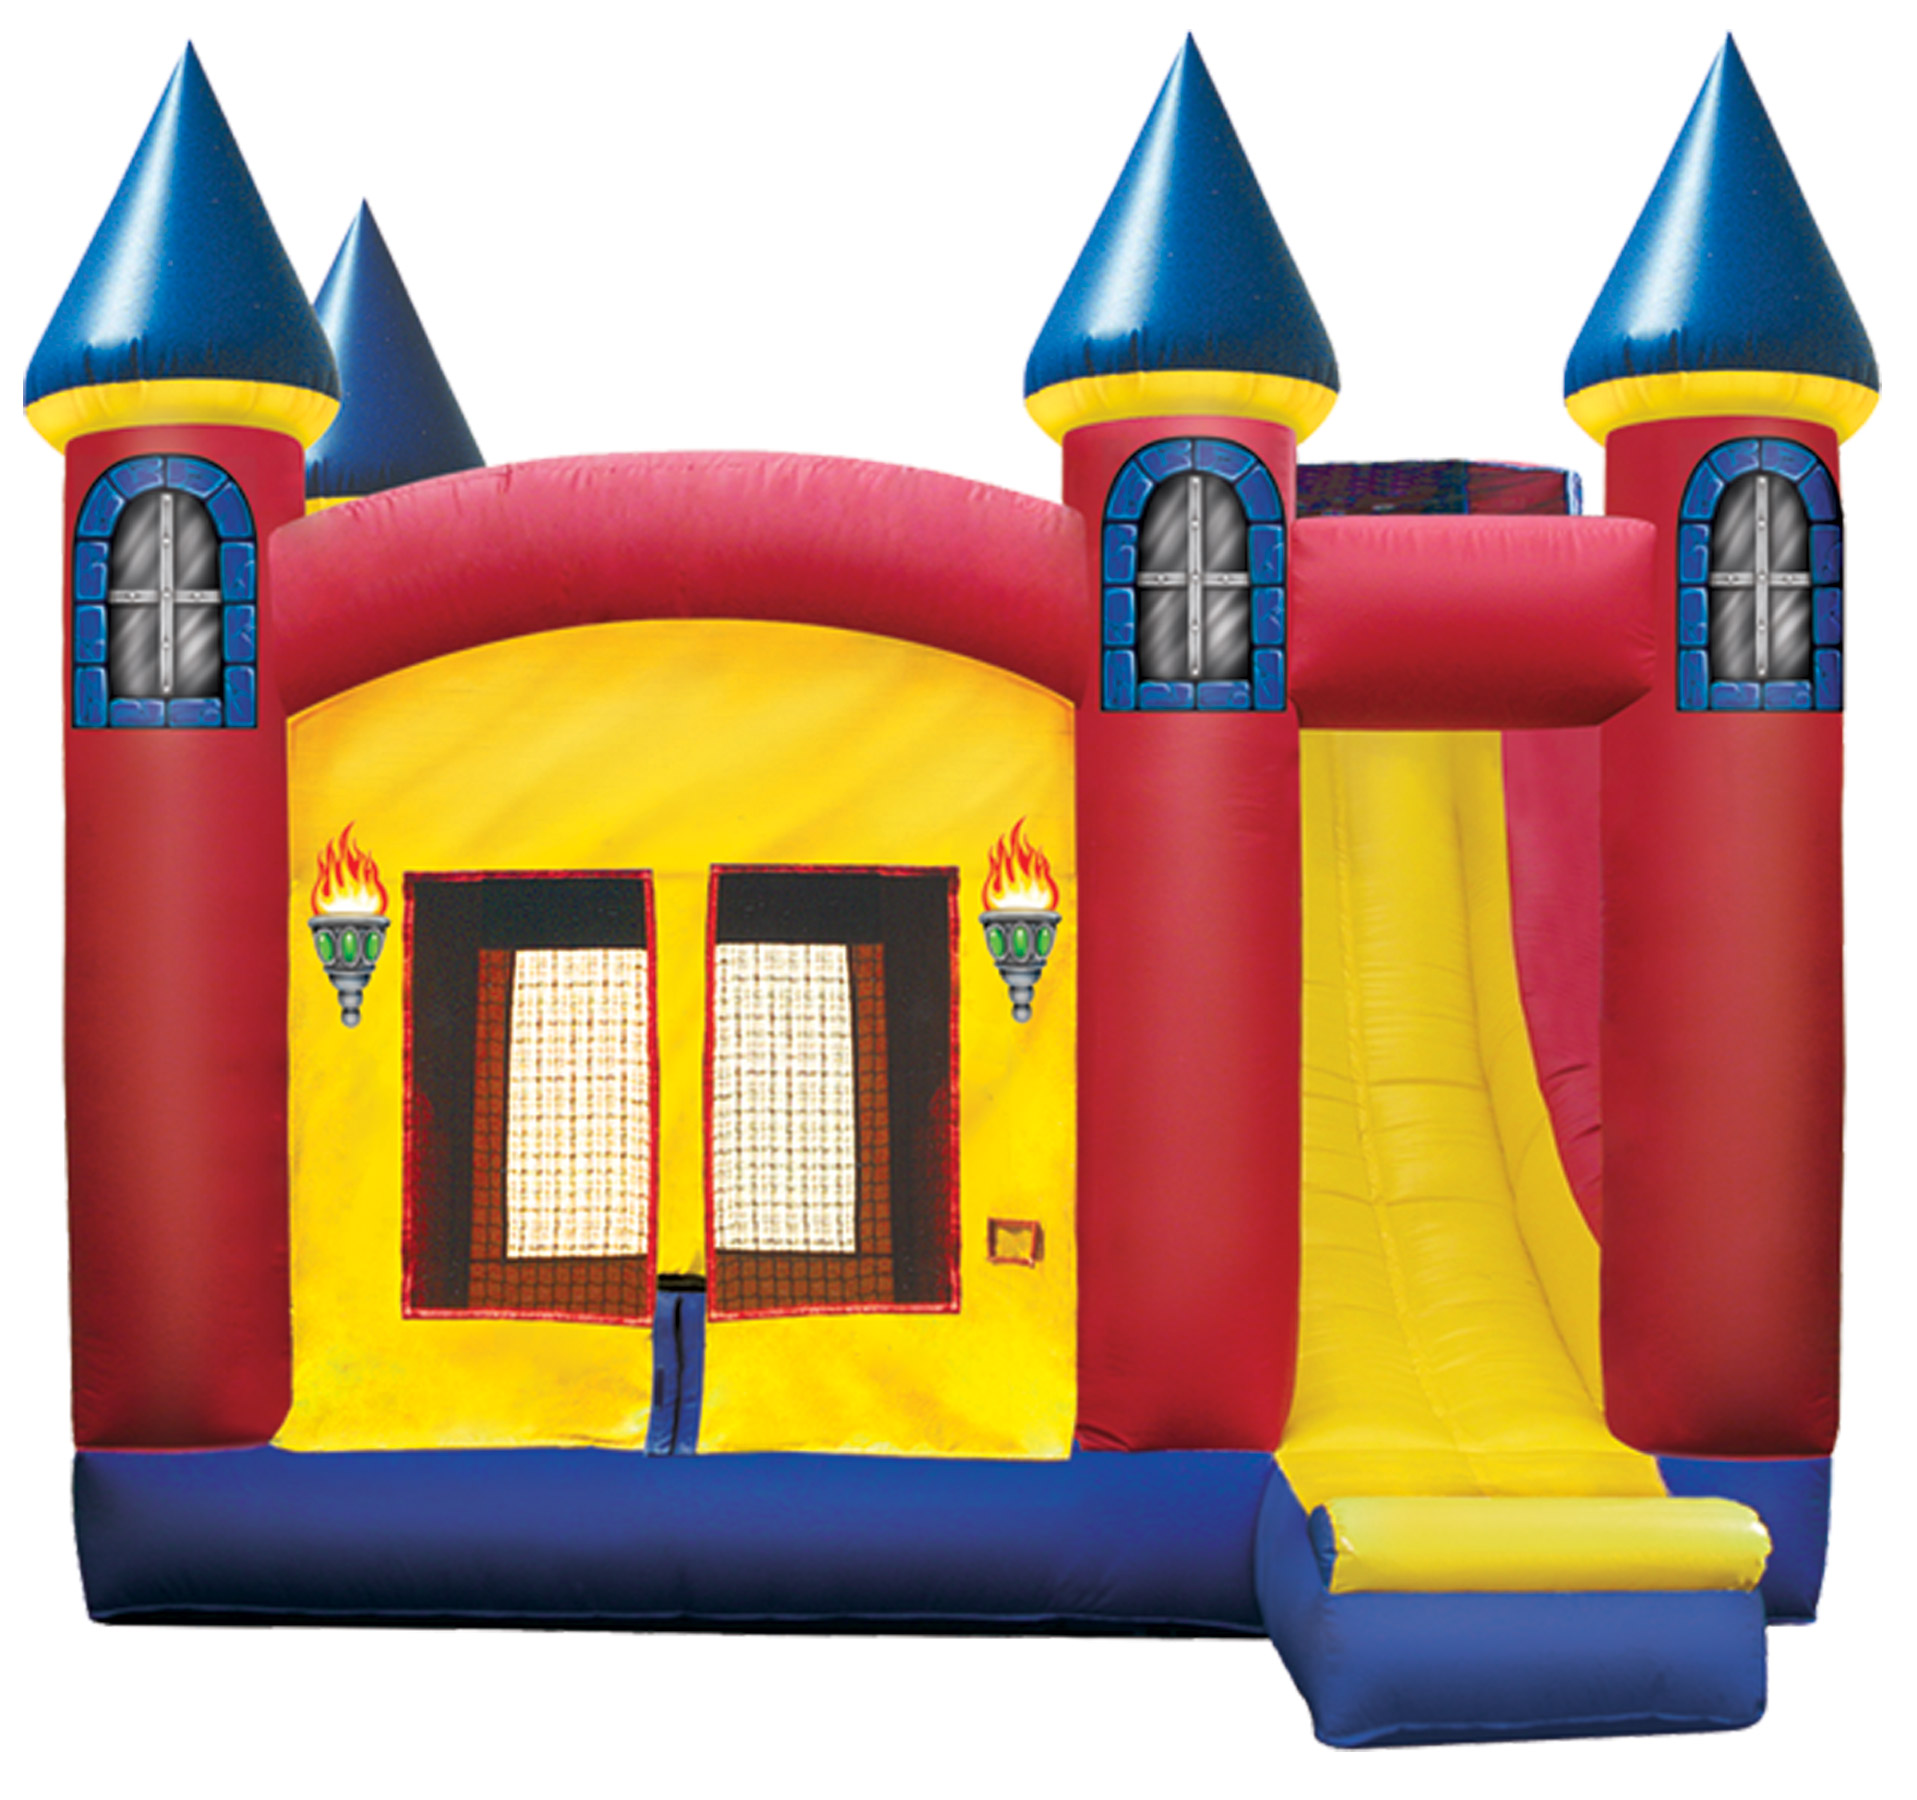 Excalibur Castle Bounce House Rental - 5 in 1 Combo